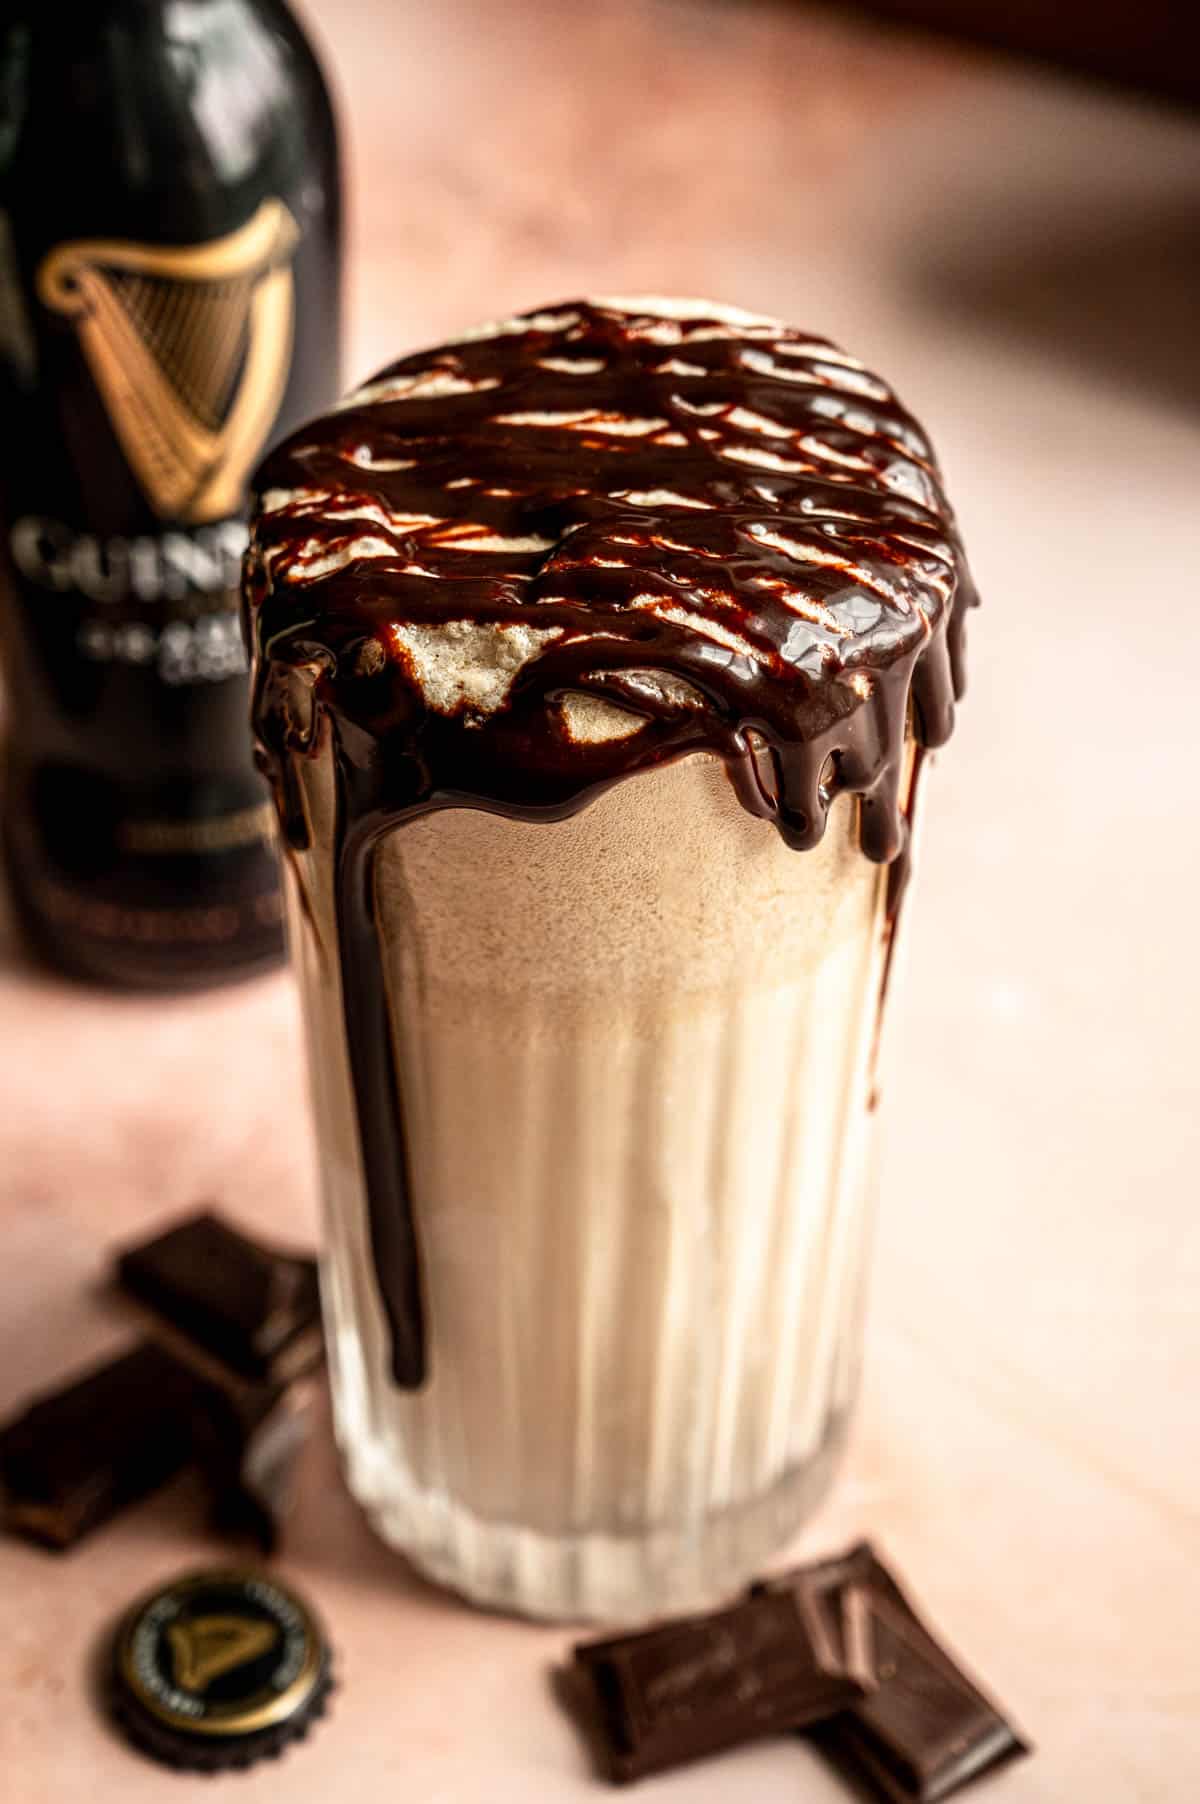 The chocolate sauce has been added to the glass.